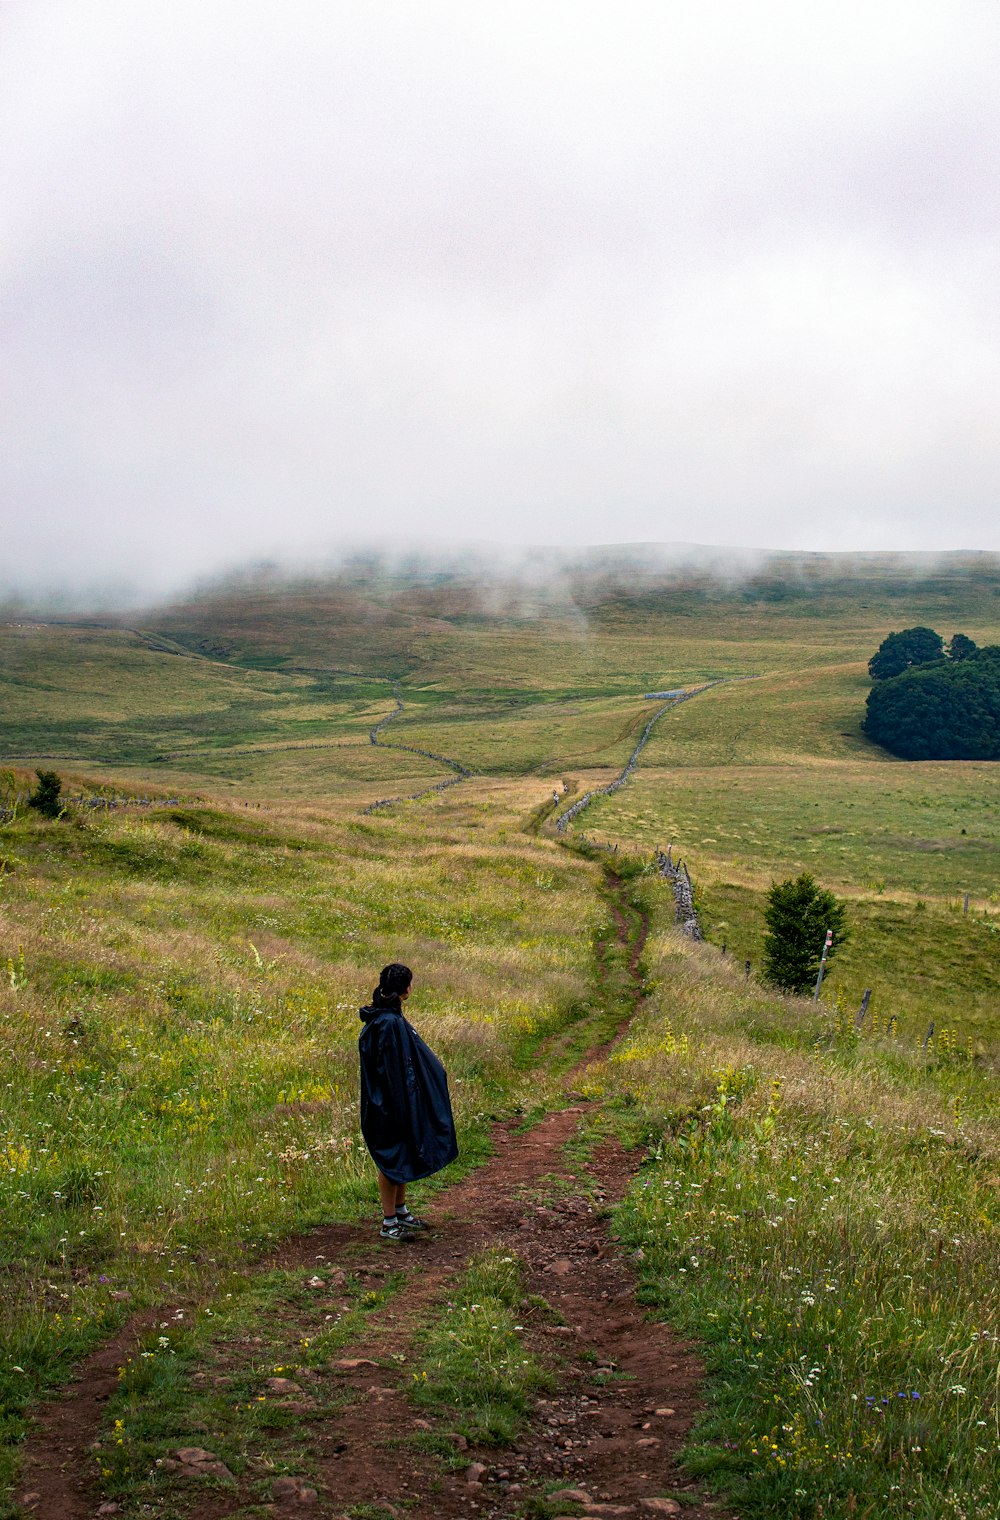 a person walking on a dirt path in a field